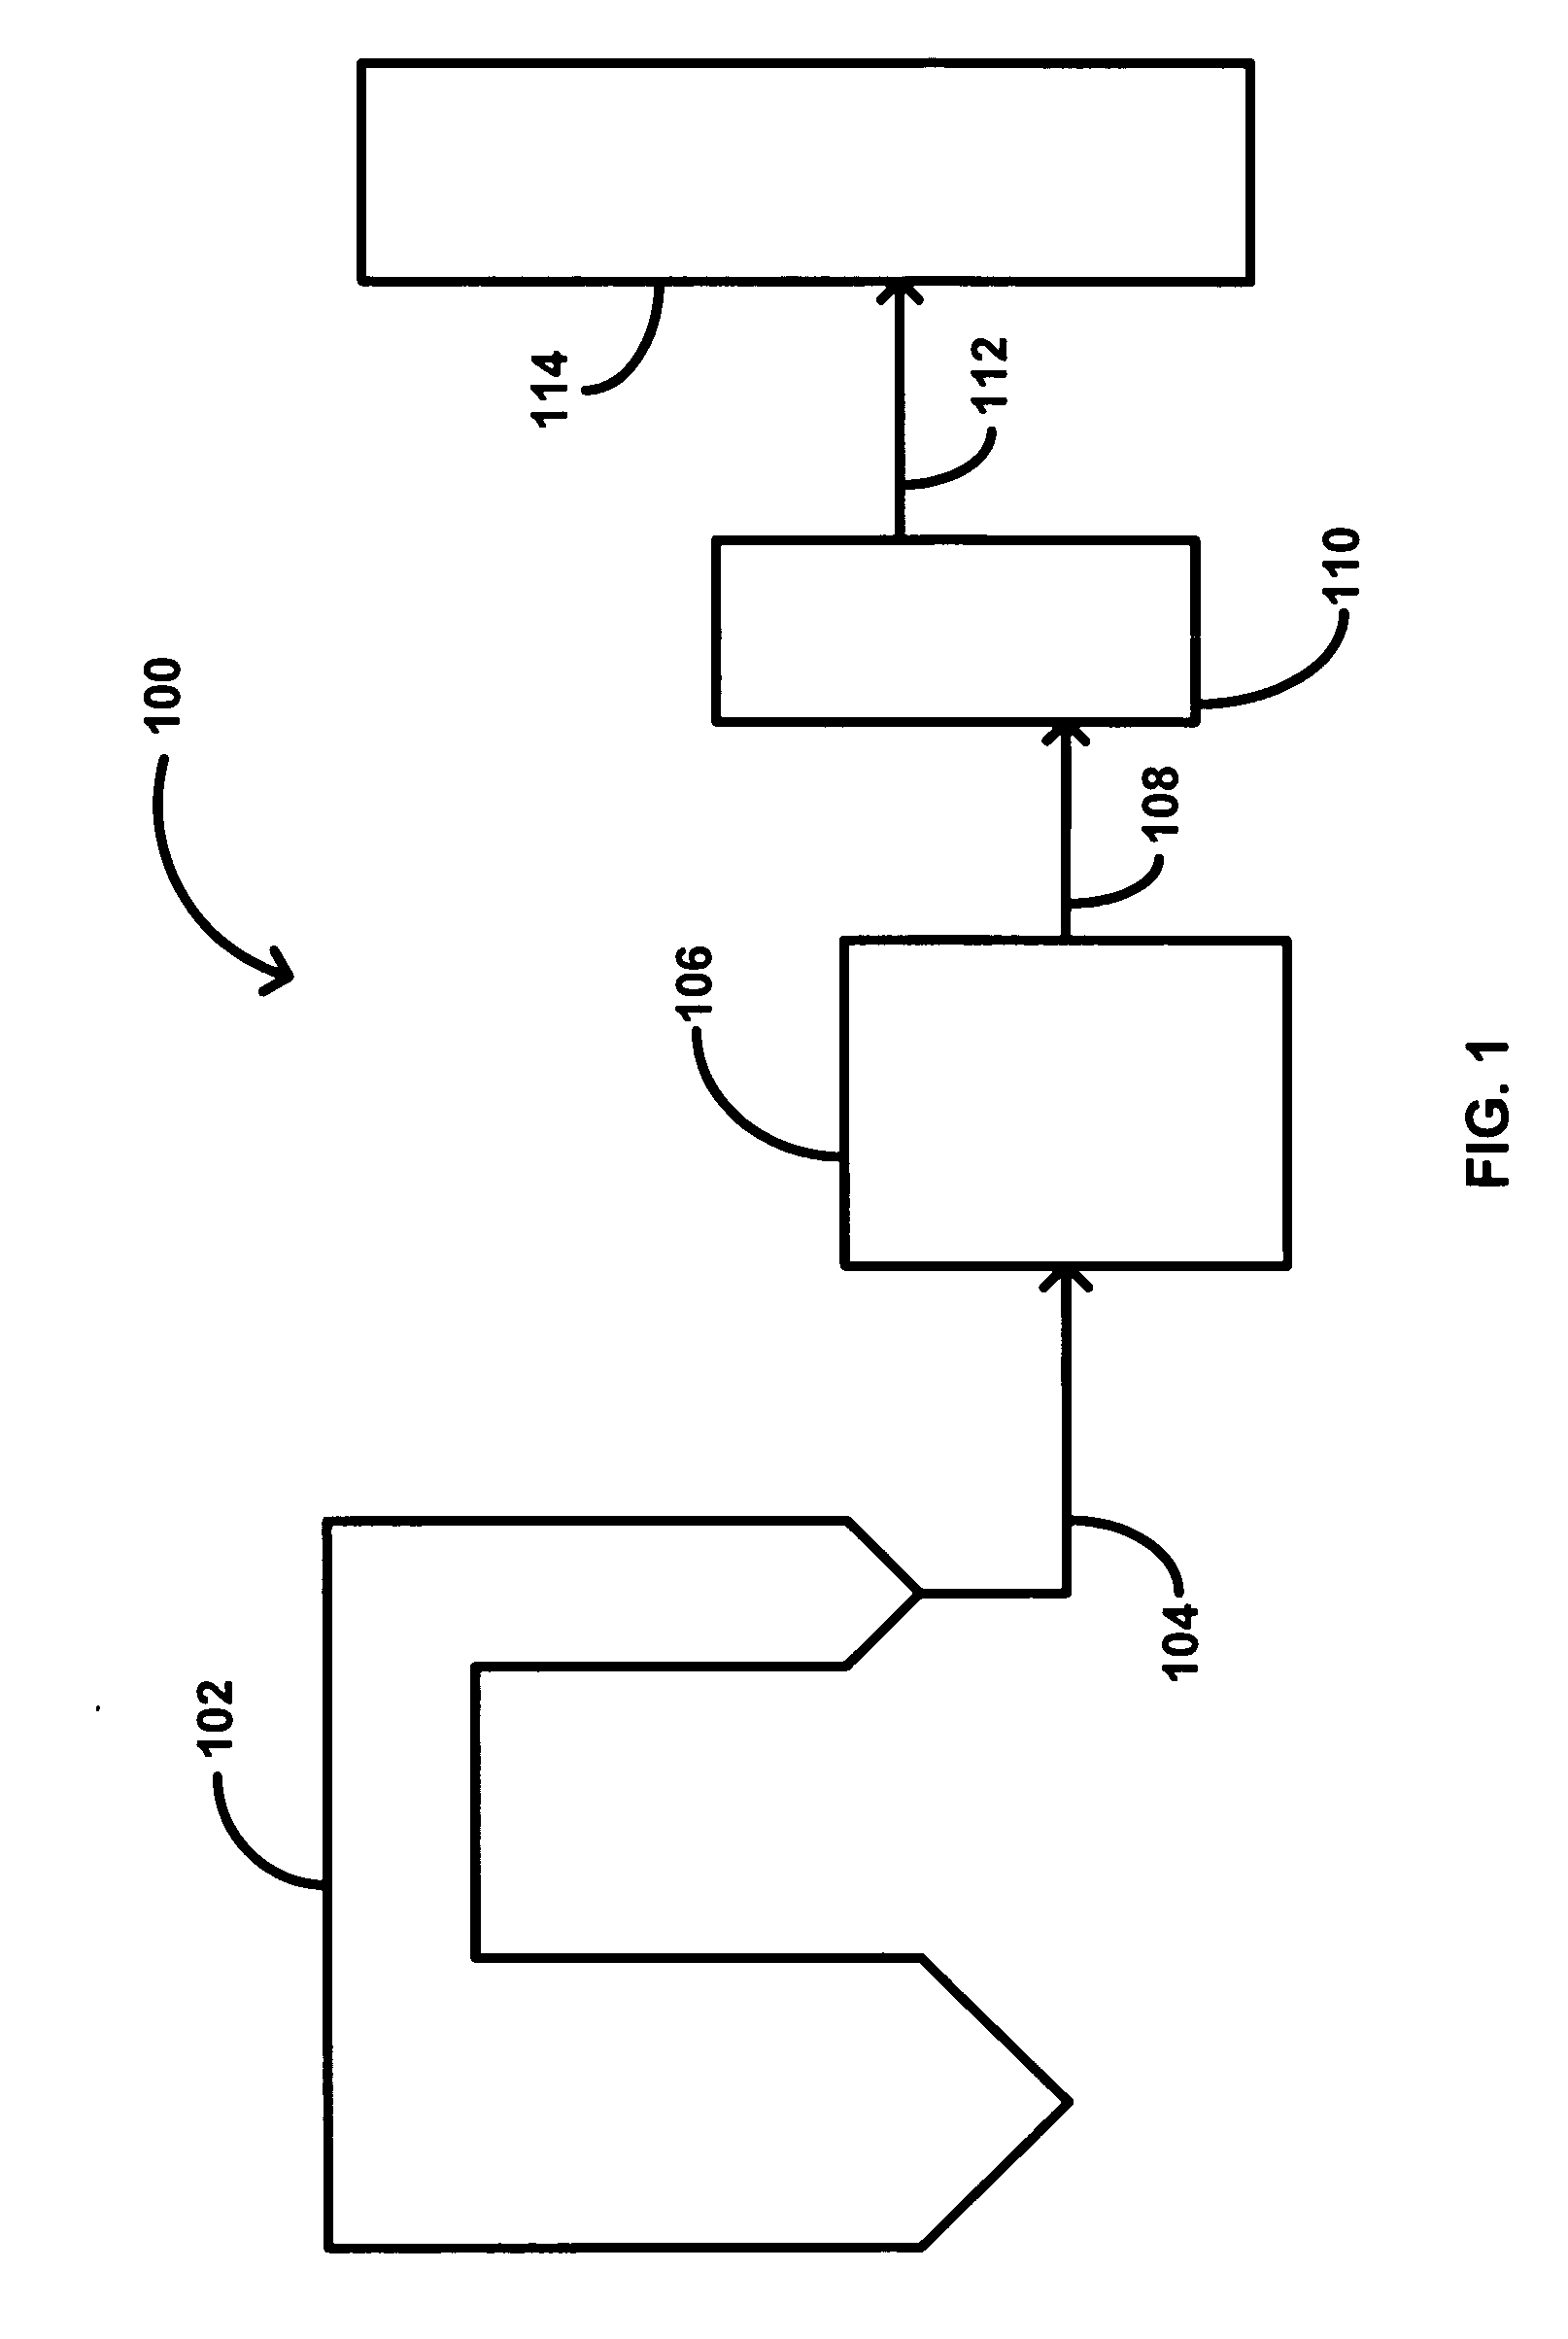 Sorbent filter for the removal of vapor phase contaminants